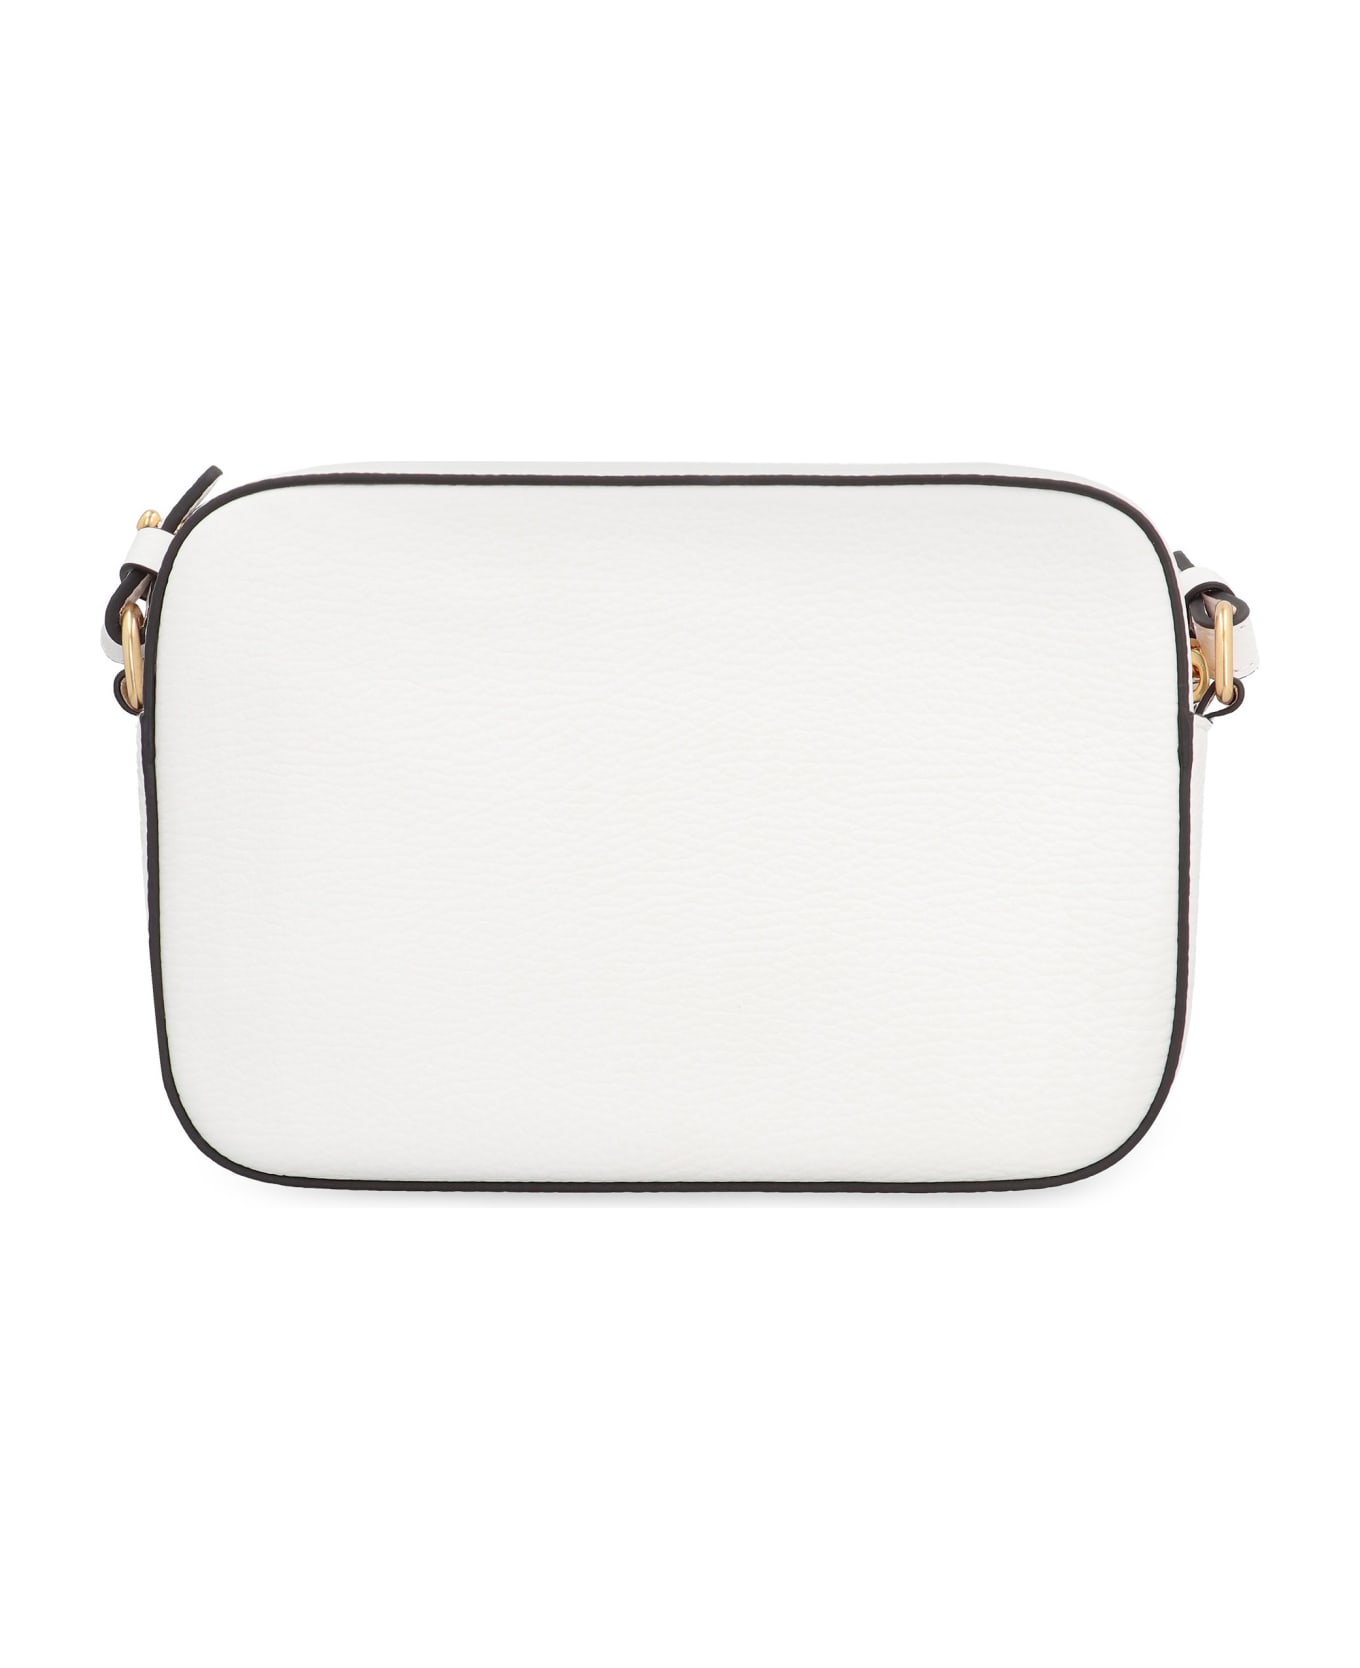 Coccinelle Beat Soft Leather Crossbody Bag - White ショルダーバッグ